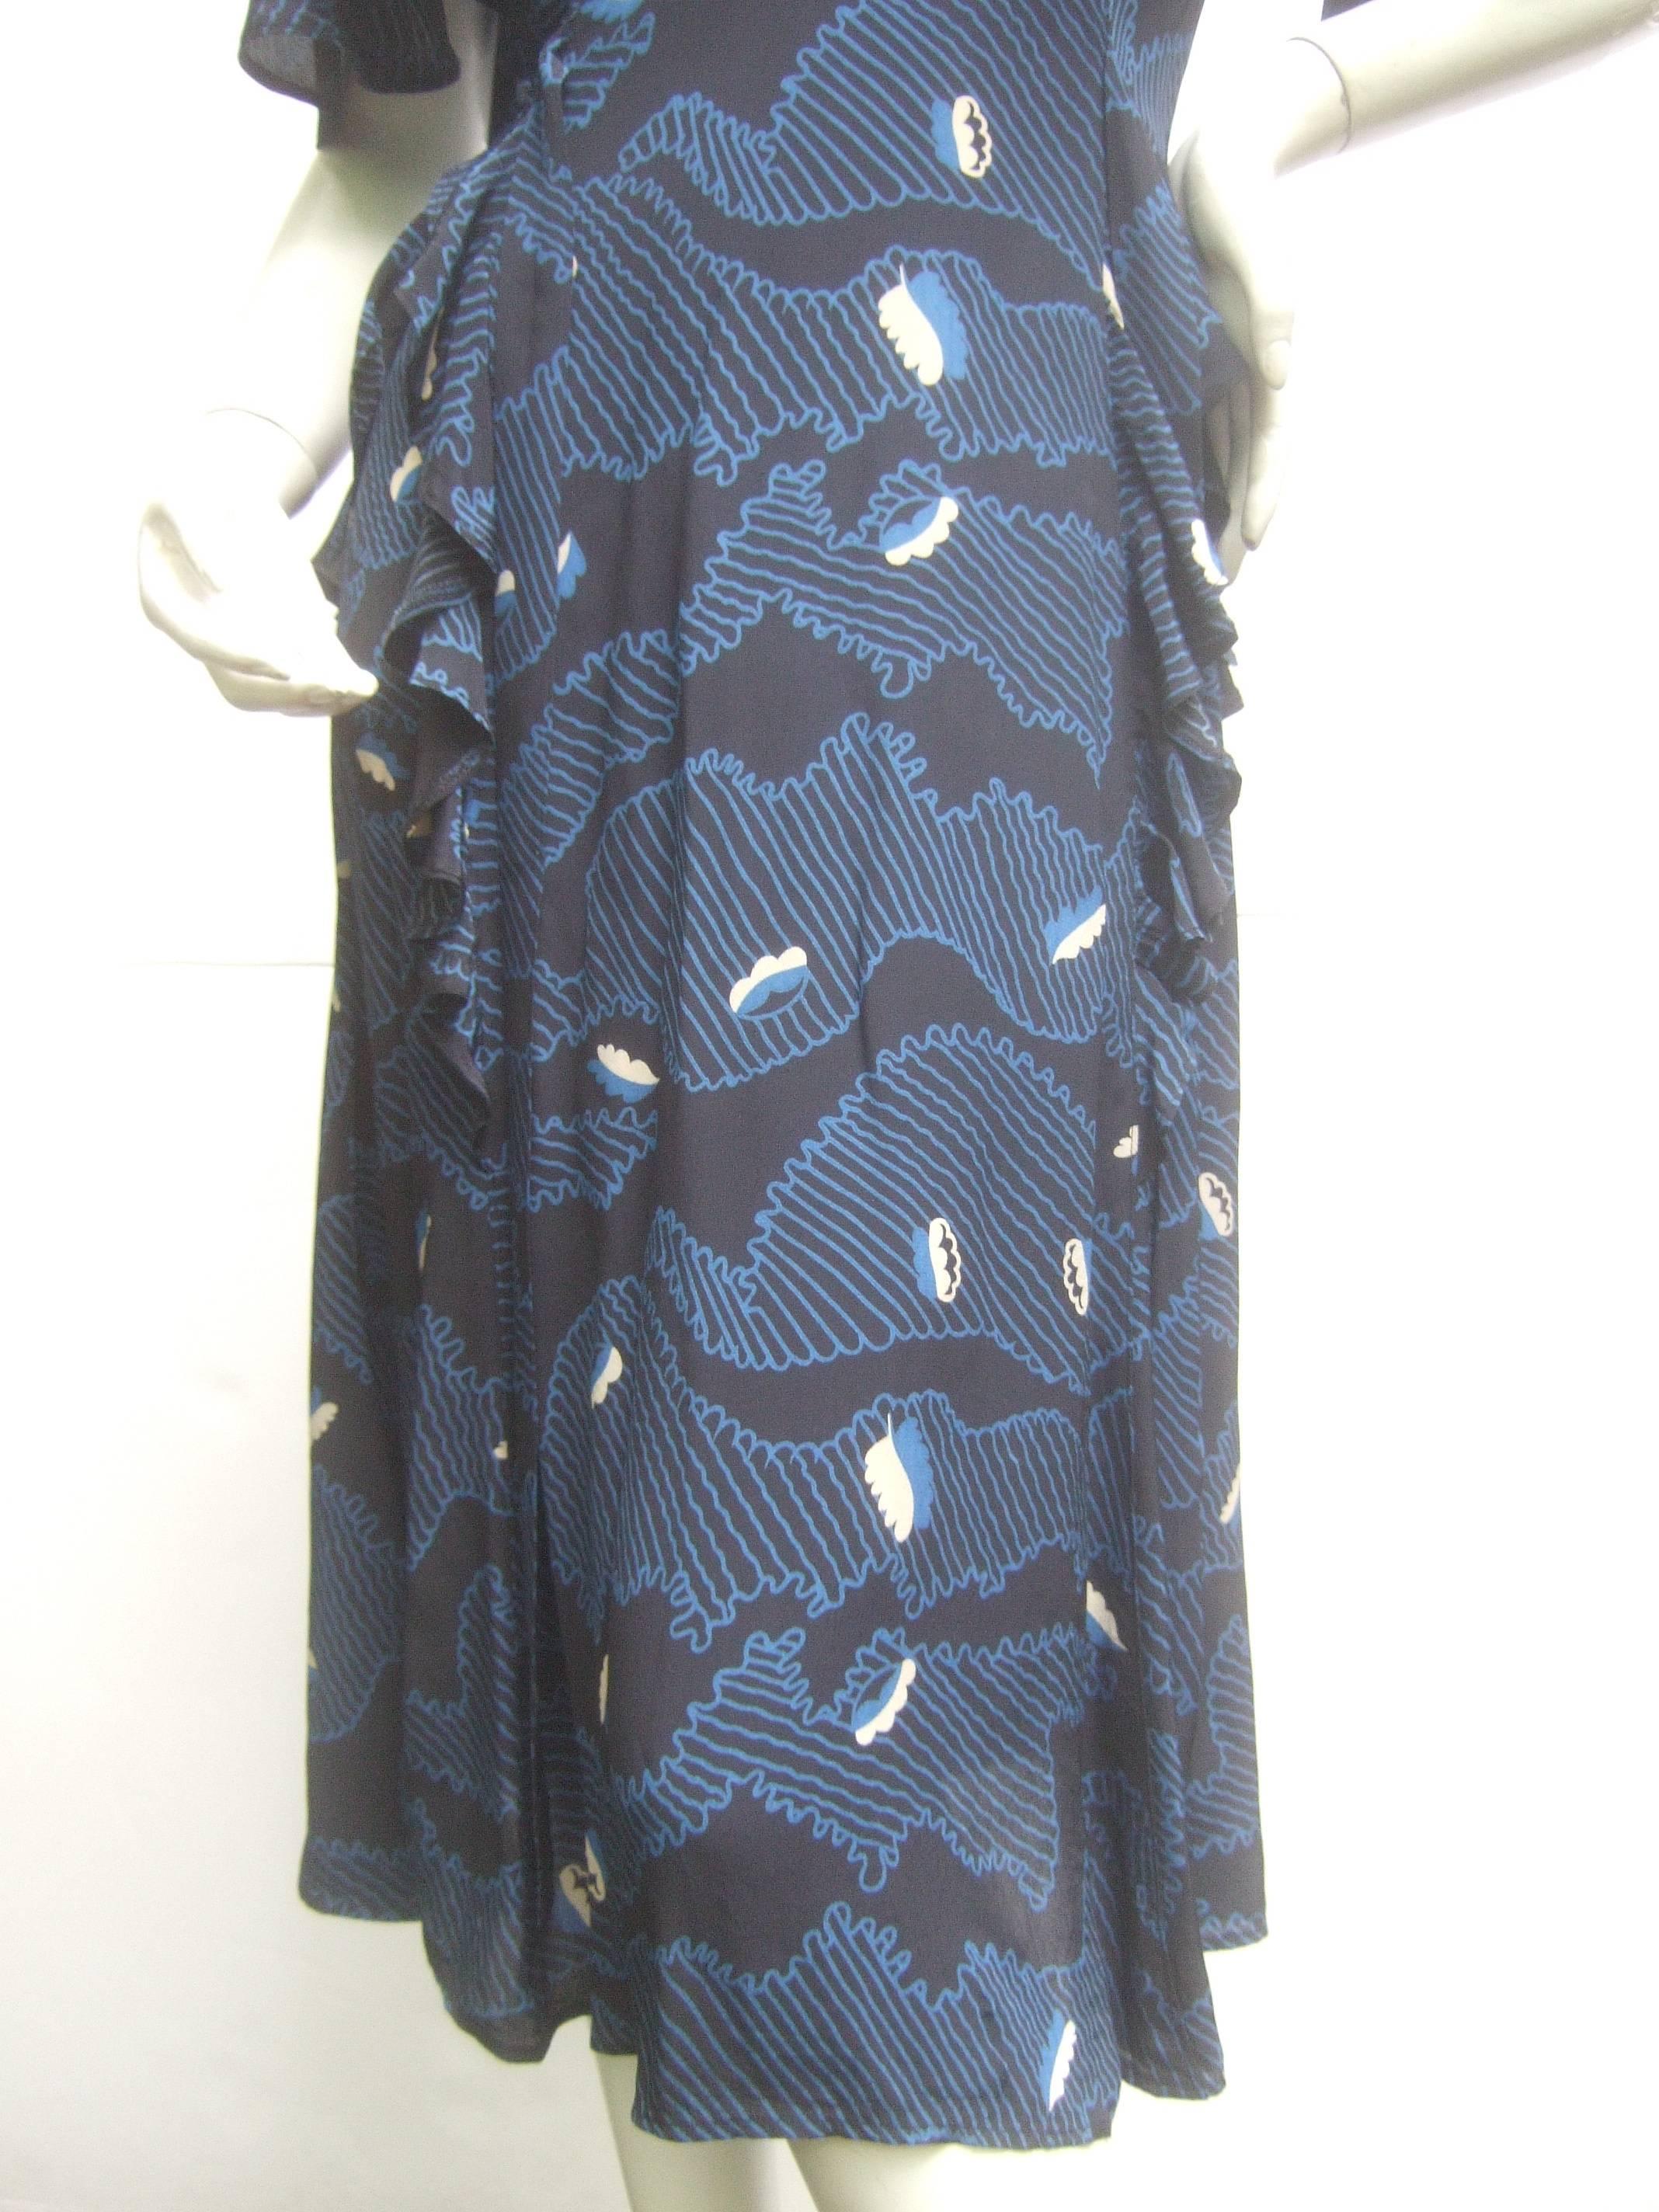 Ossie Clark Moss Crepe Dress with Celia Birtwell Fabric. Early 1970's. 2